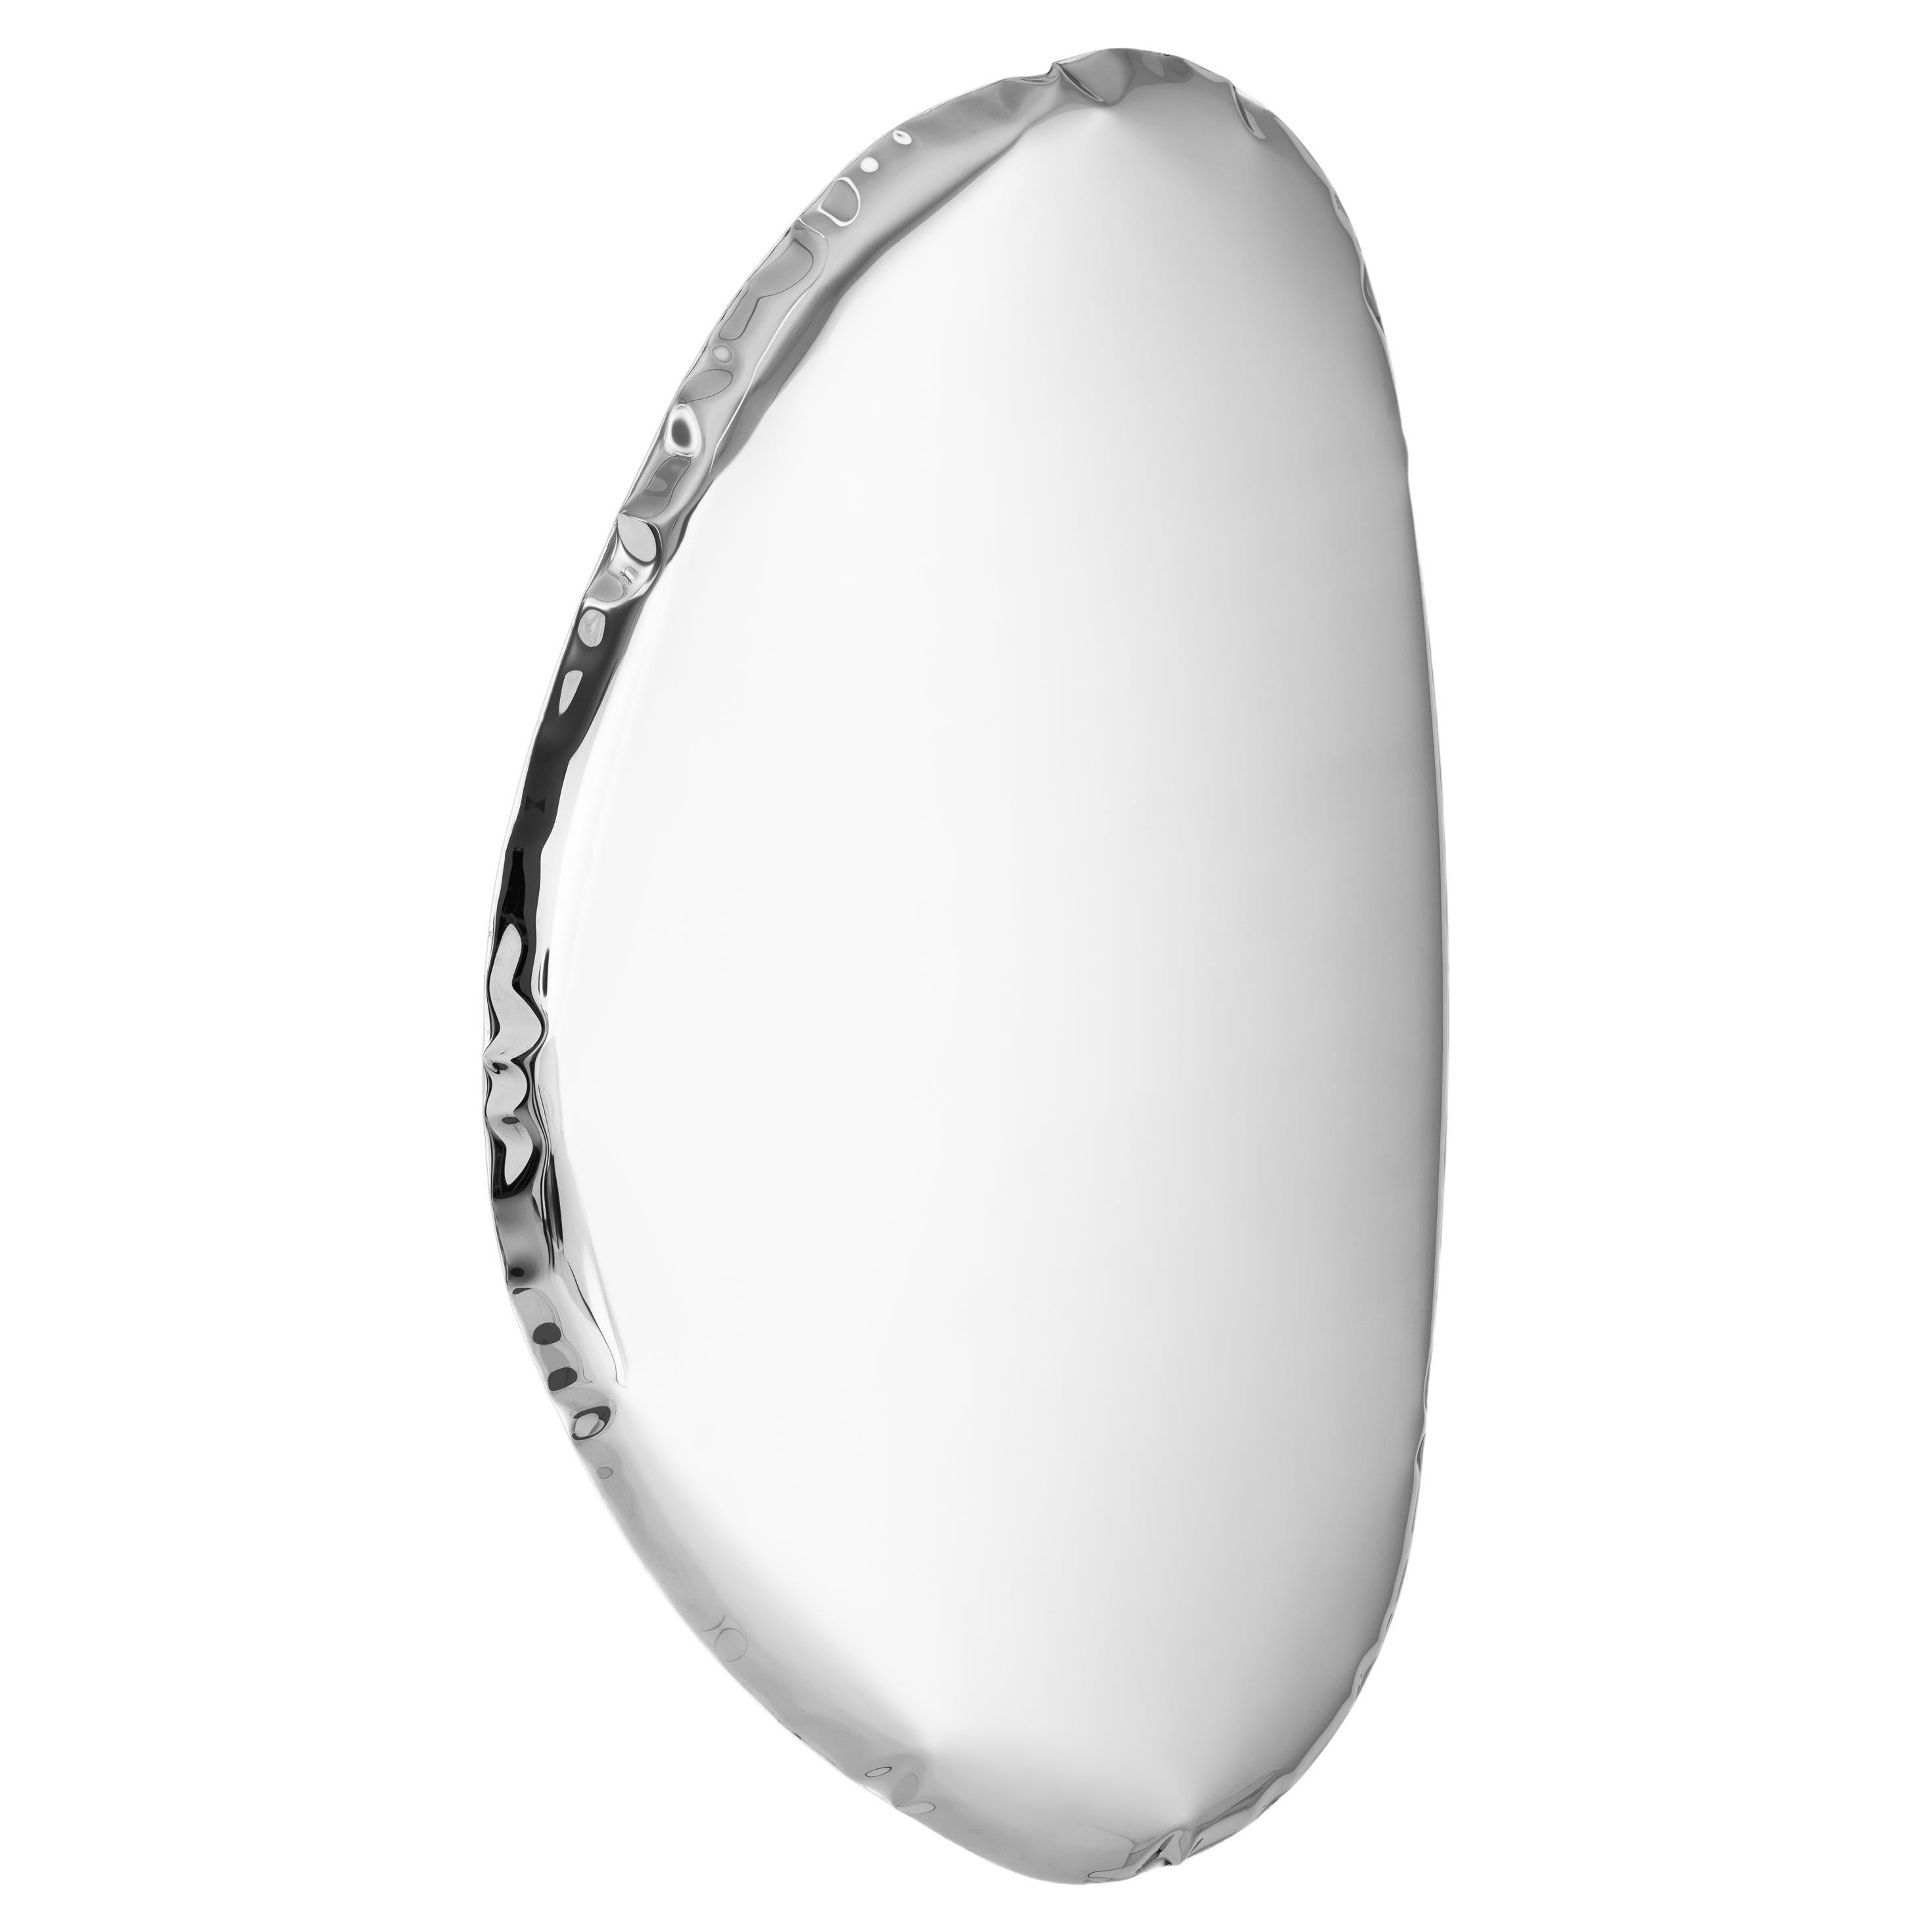 In Stock Tafla O3 Polished Stainless Steel Wall Mirror by Zieta For Sale